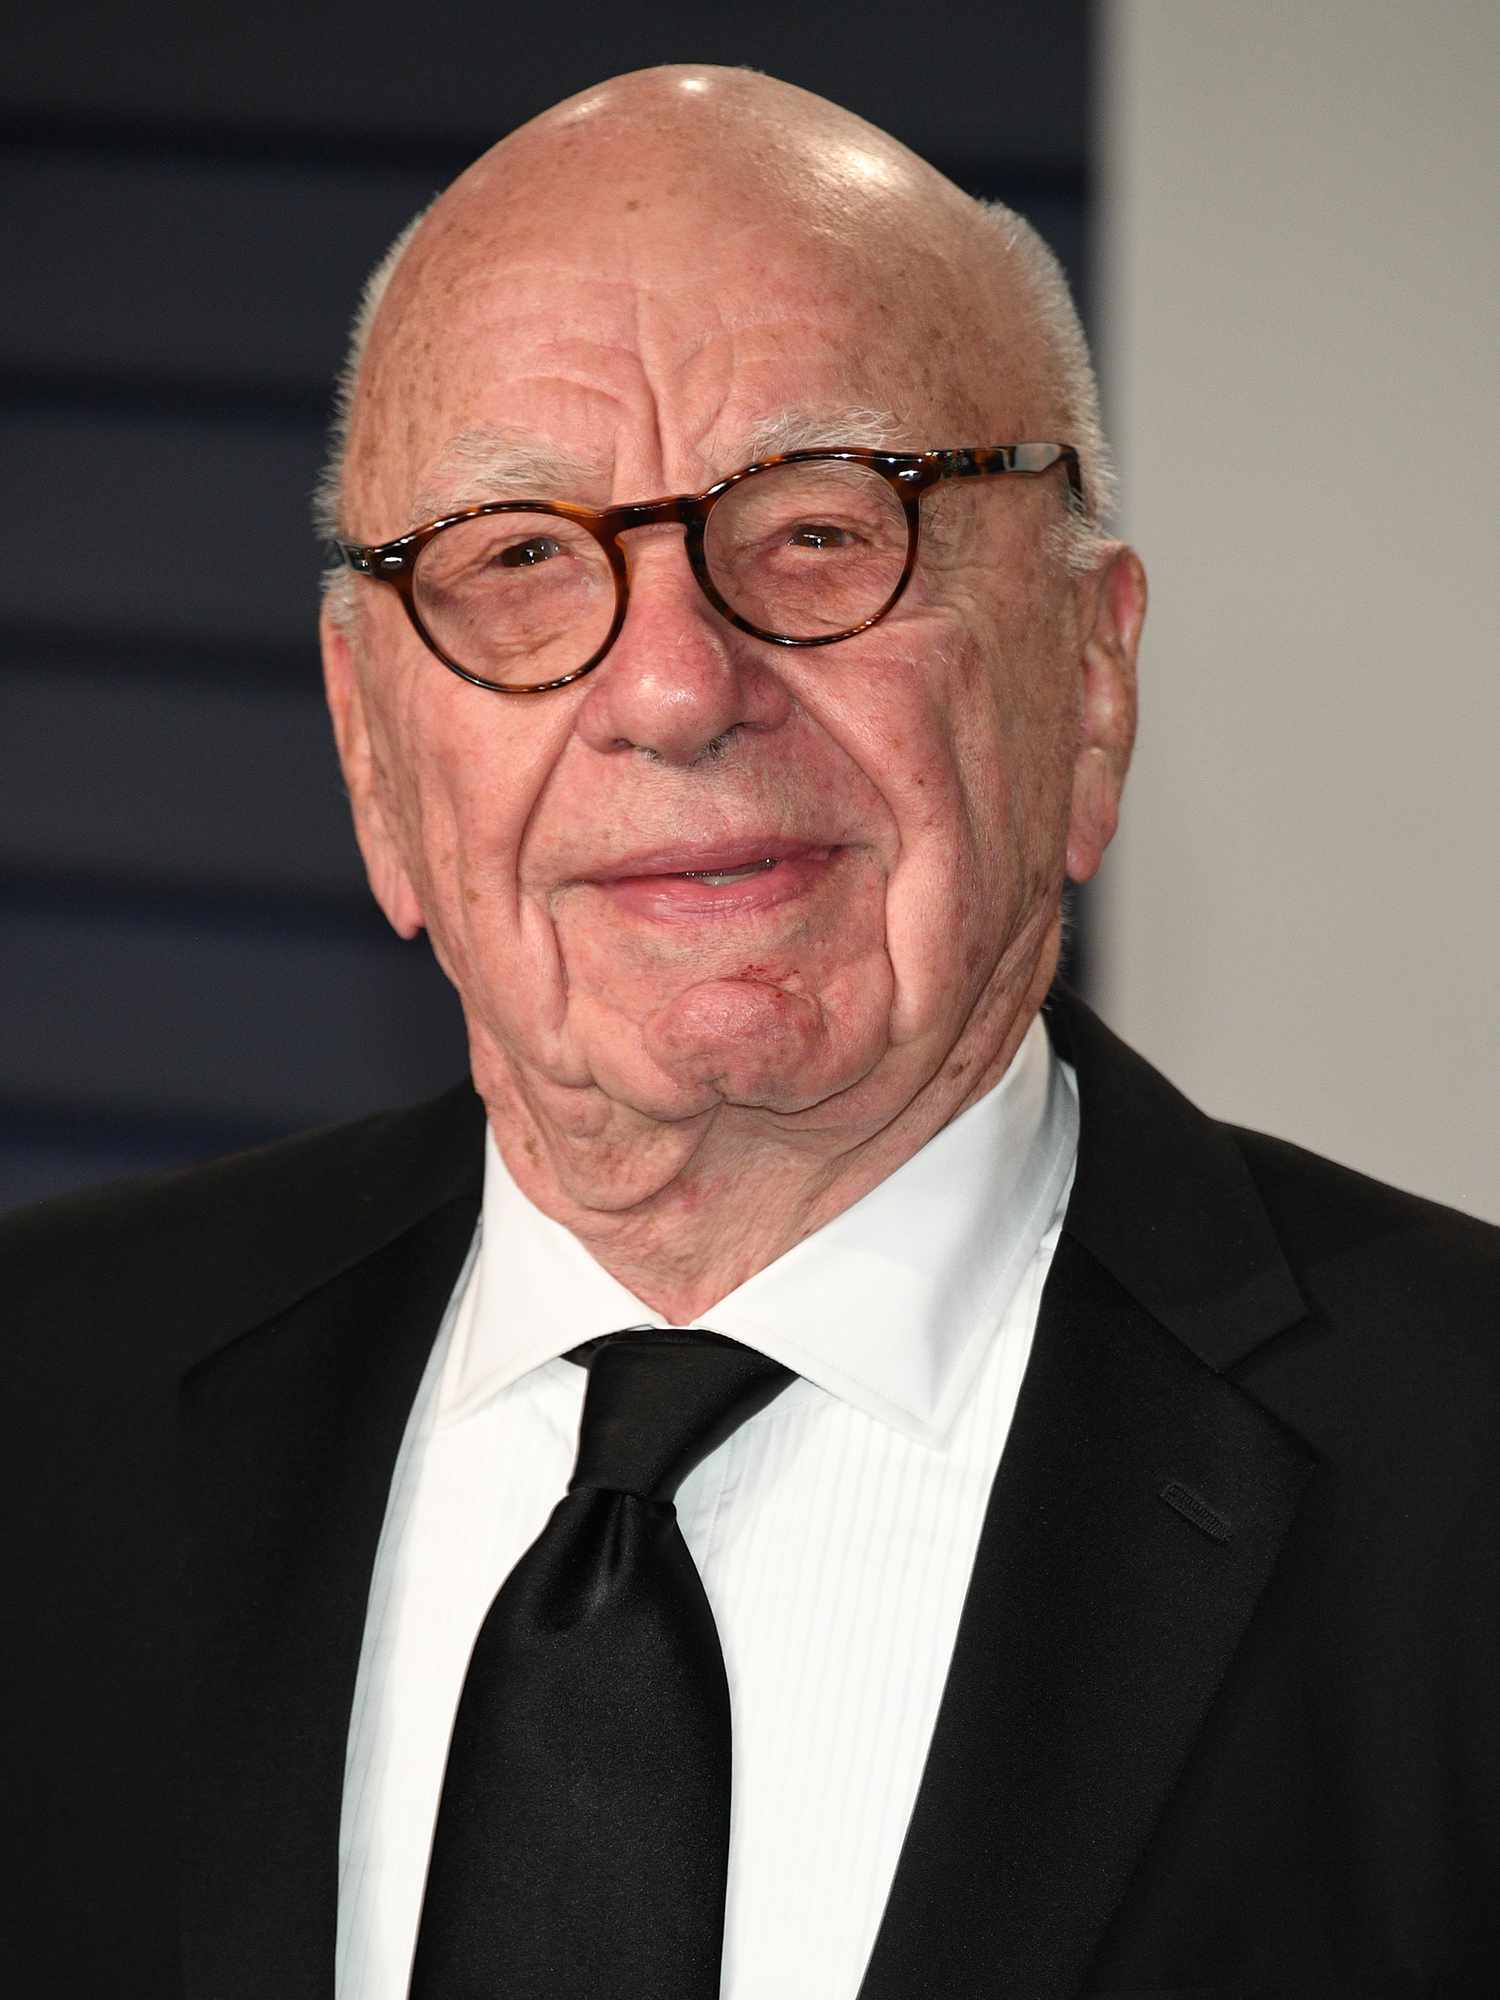 Rupert Murdoch attends 2019 Vanity Fair Oscar Party Hosted By Radhika Jones at Wallis Annenberg Center for the Performing Arts on February 24, 2019 in Beverly Hills, California